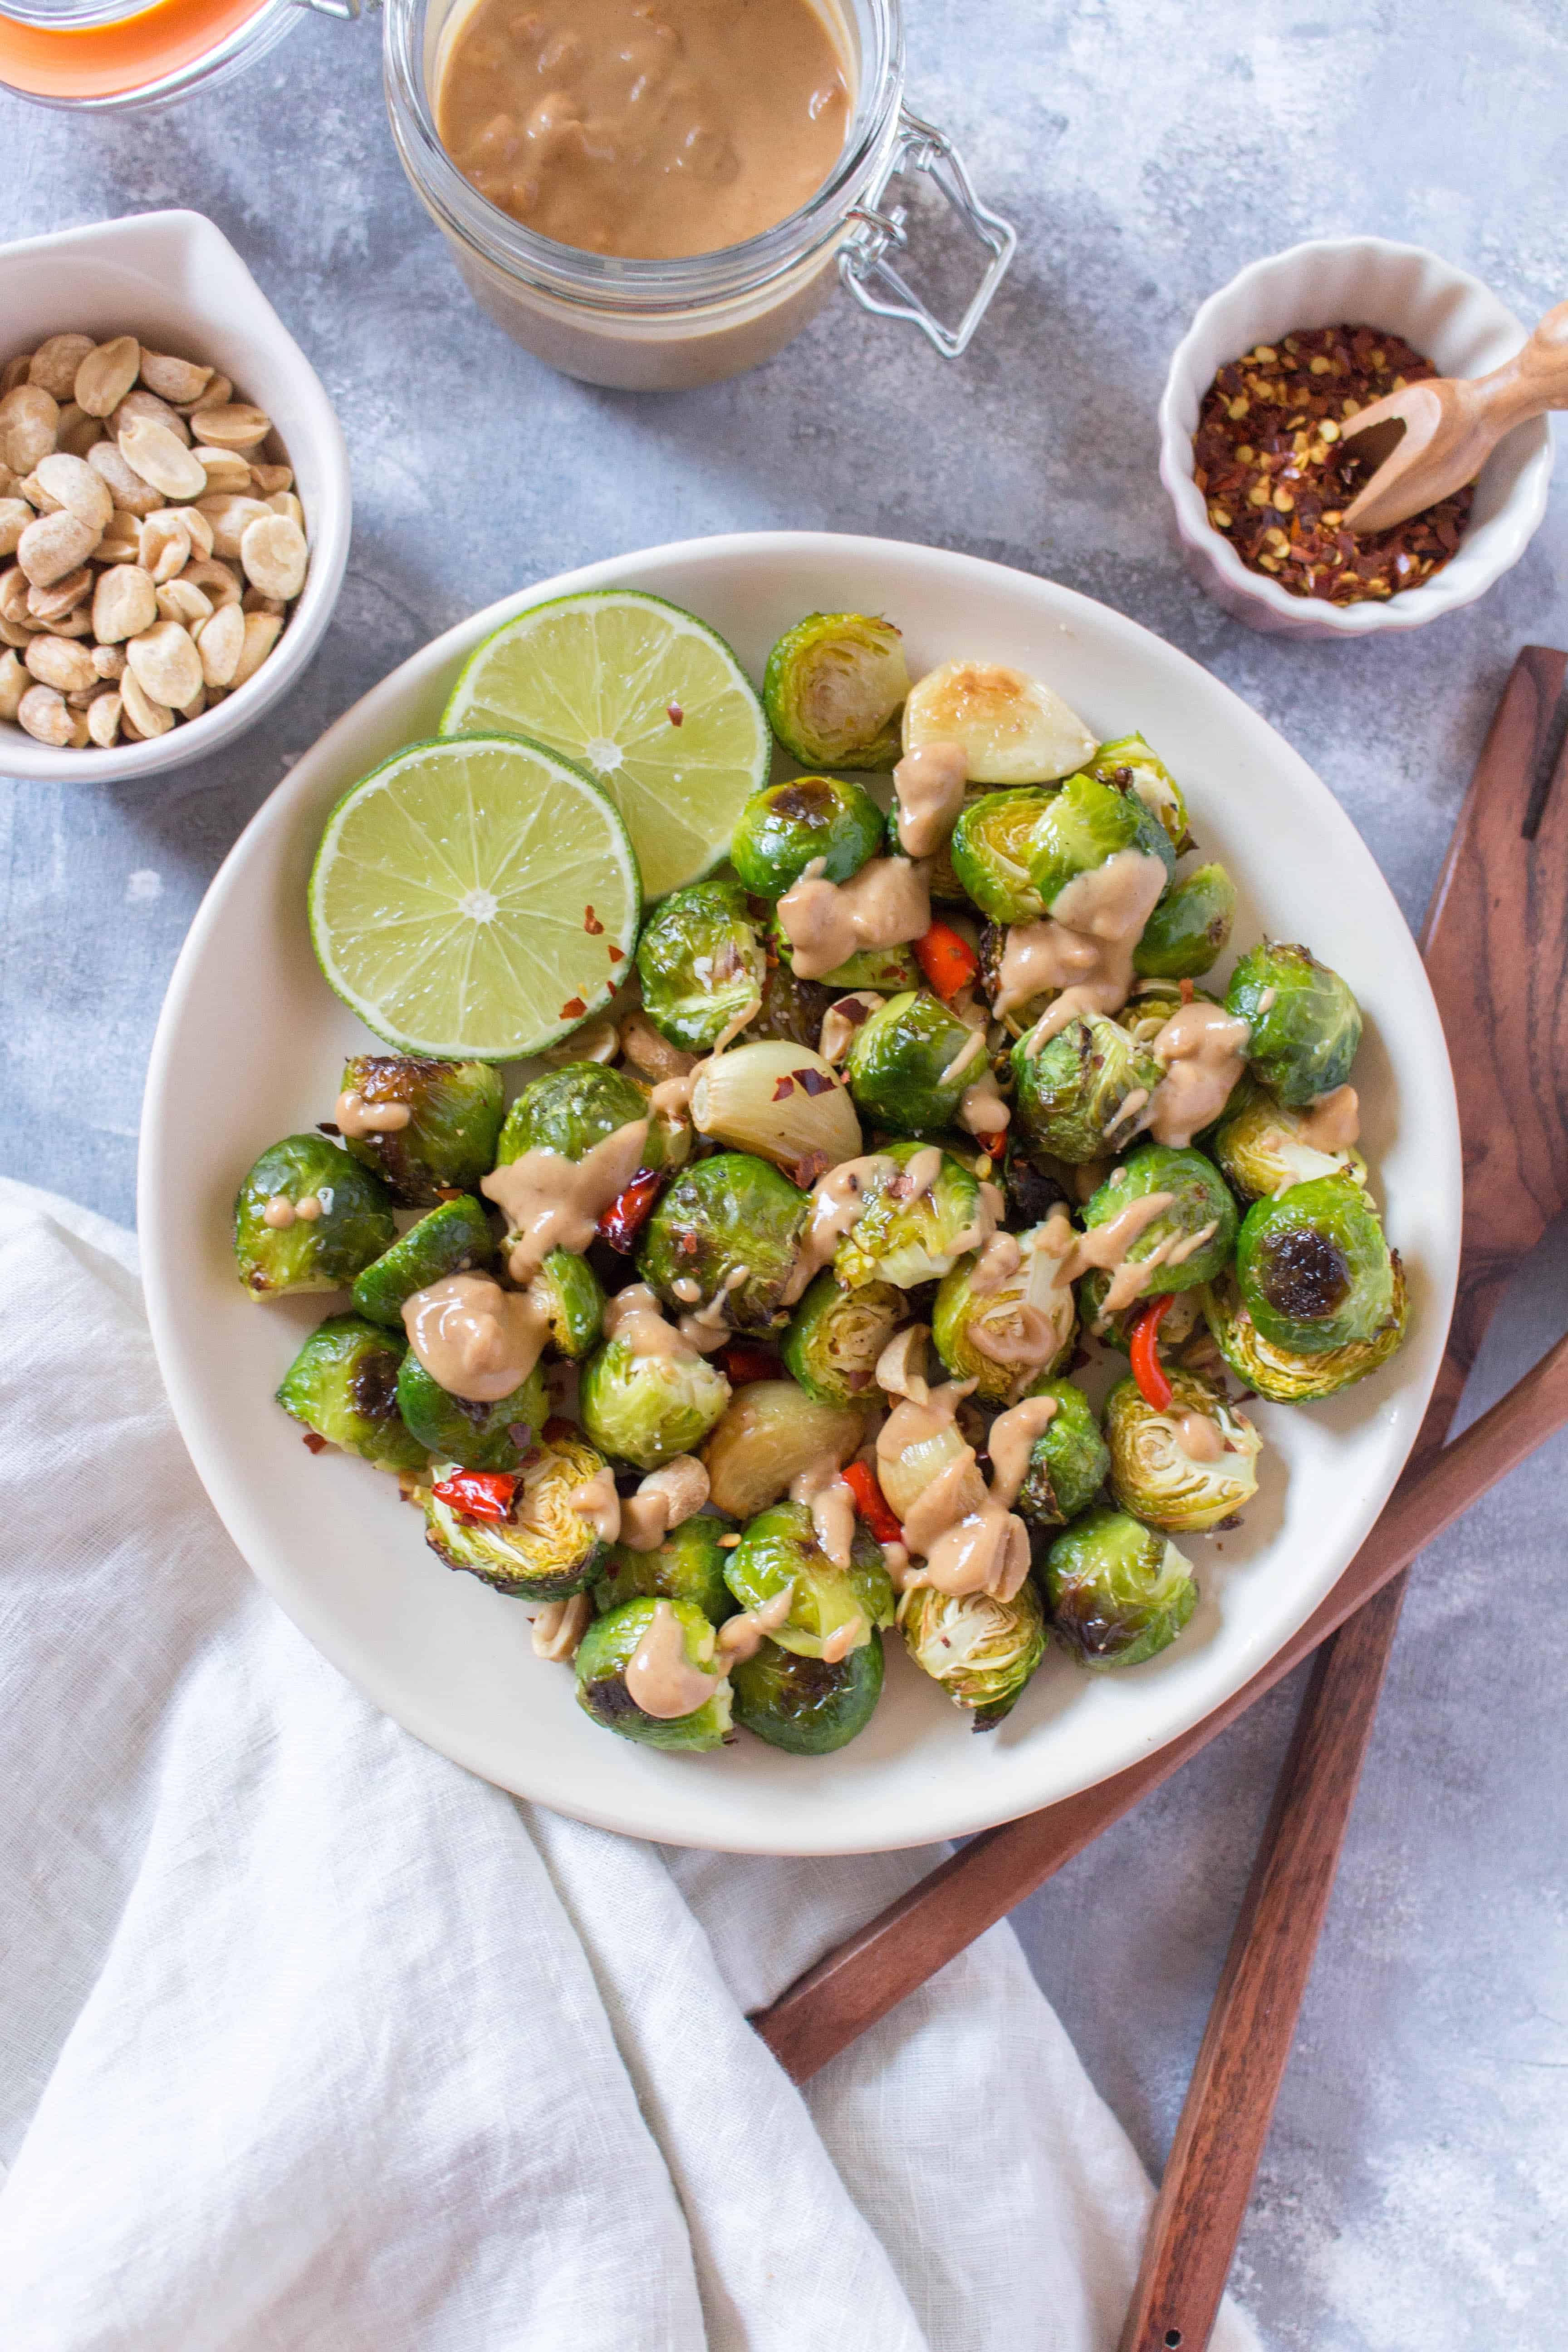 Looking to change up your regular ol' brussels sprouts? Mix things up with this Peanut Thai Chili Brussels Sprouts!